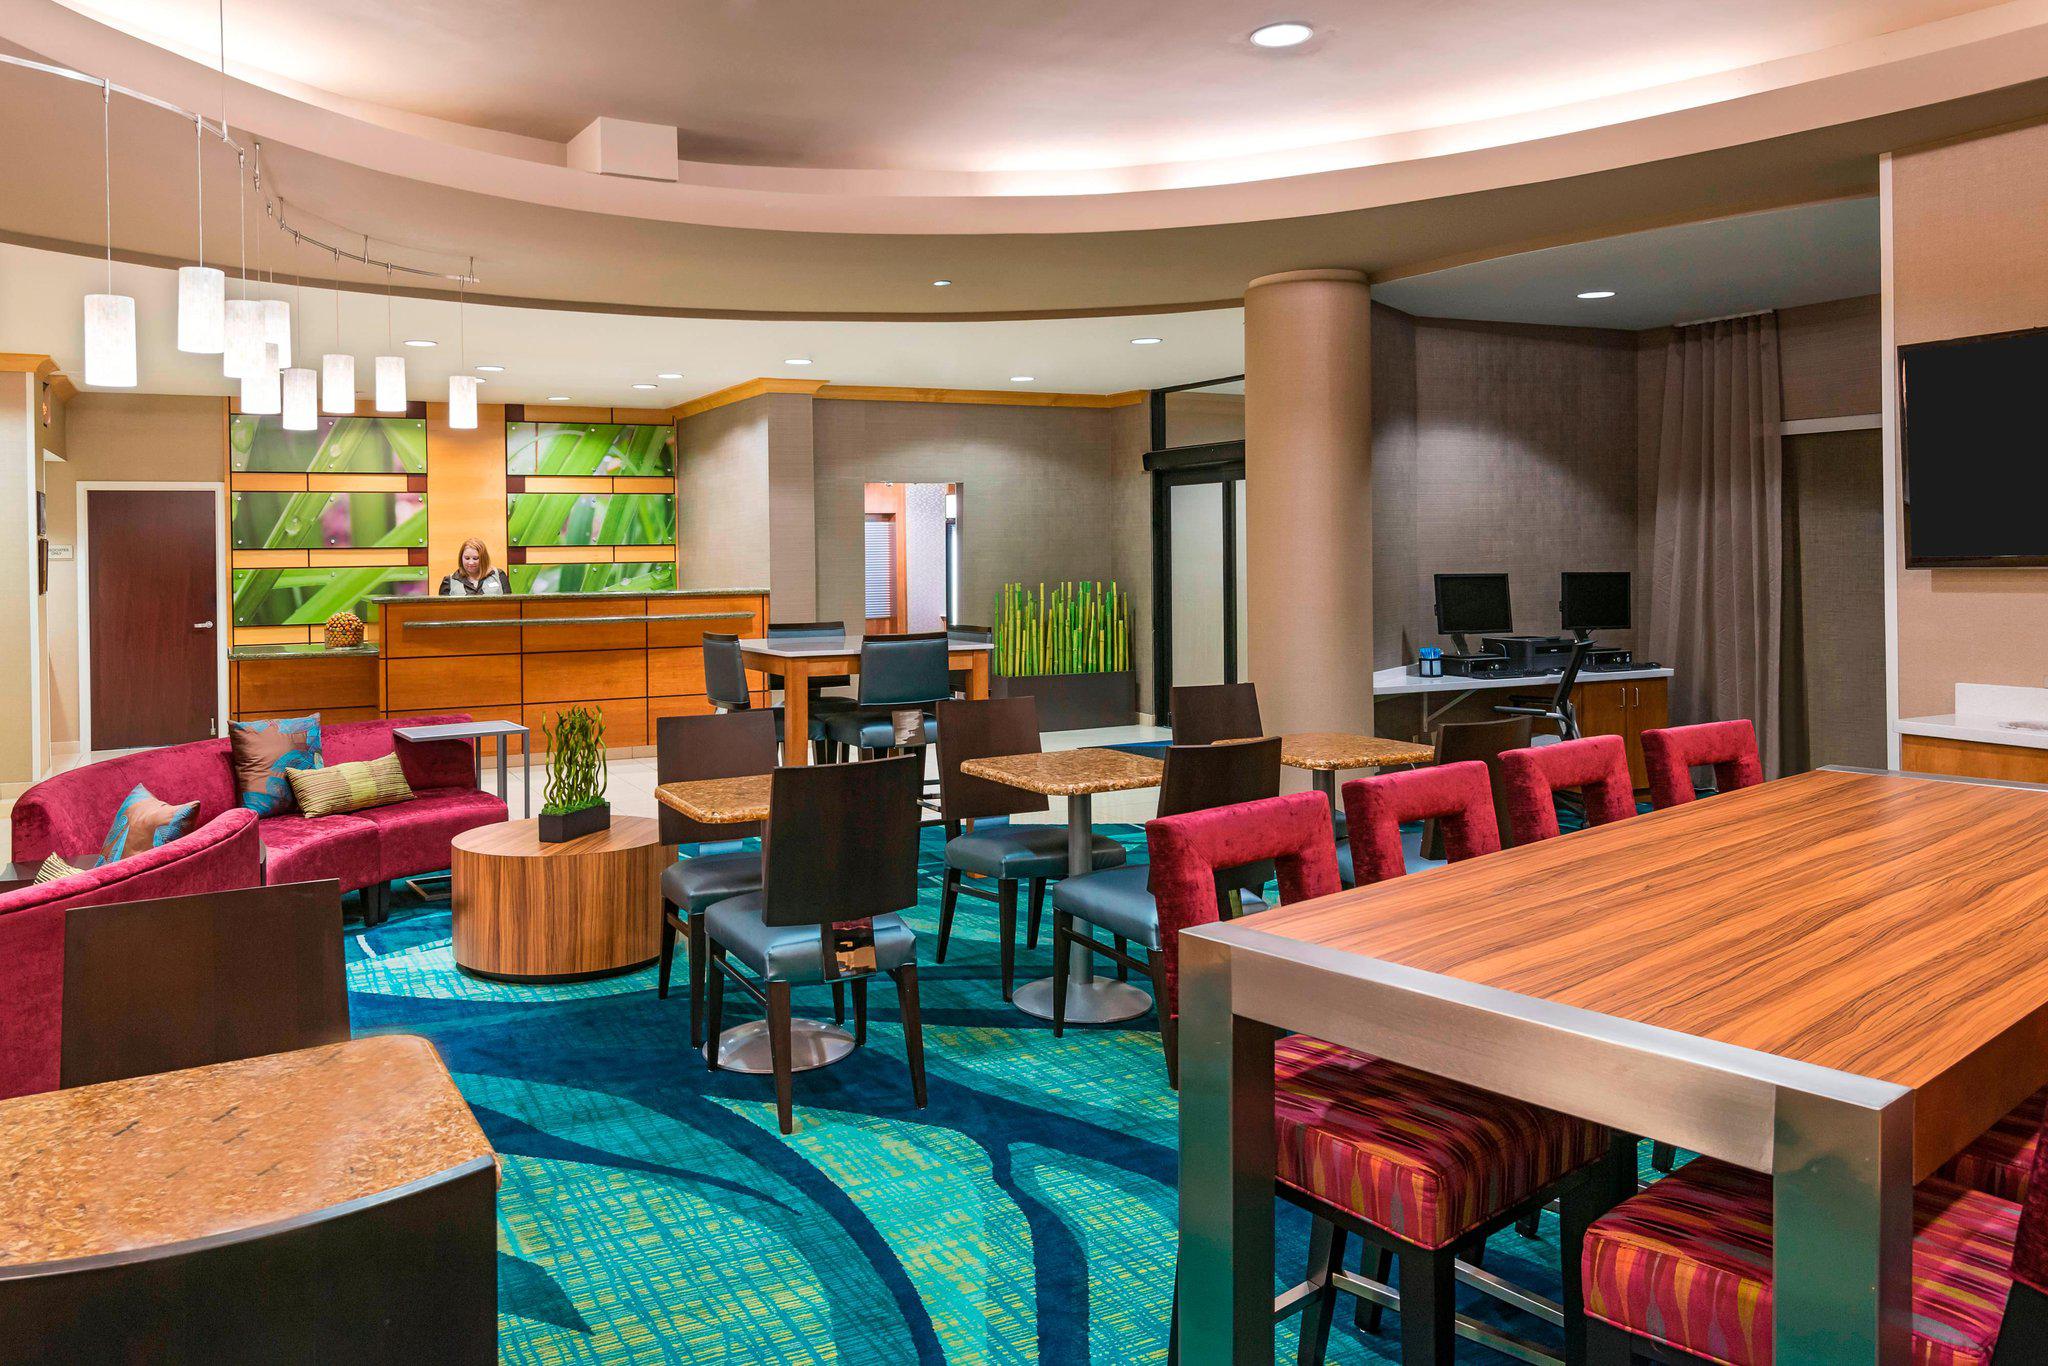 SpringHill Suites by Marriott Fort Myers Airport